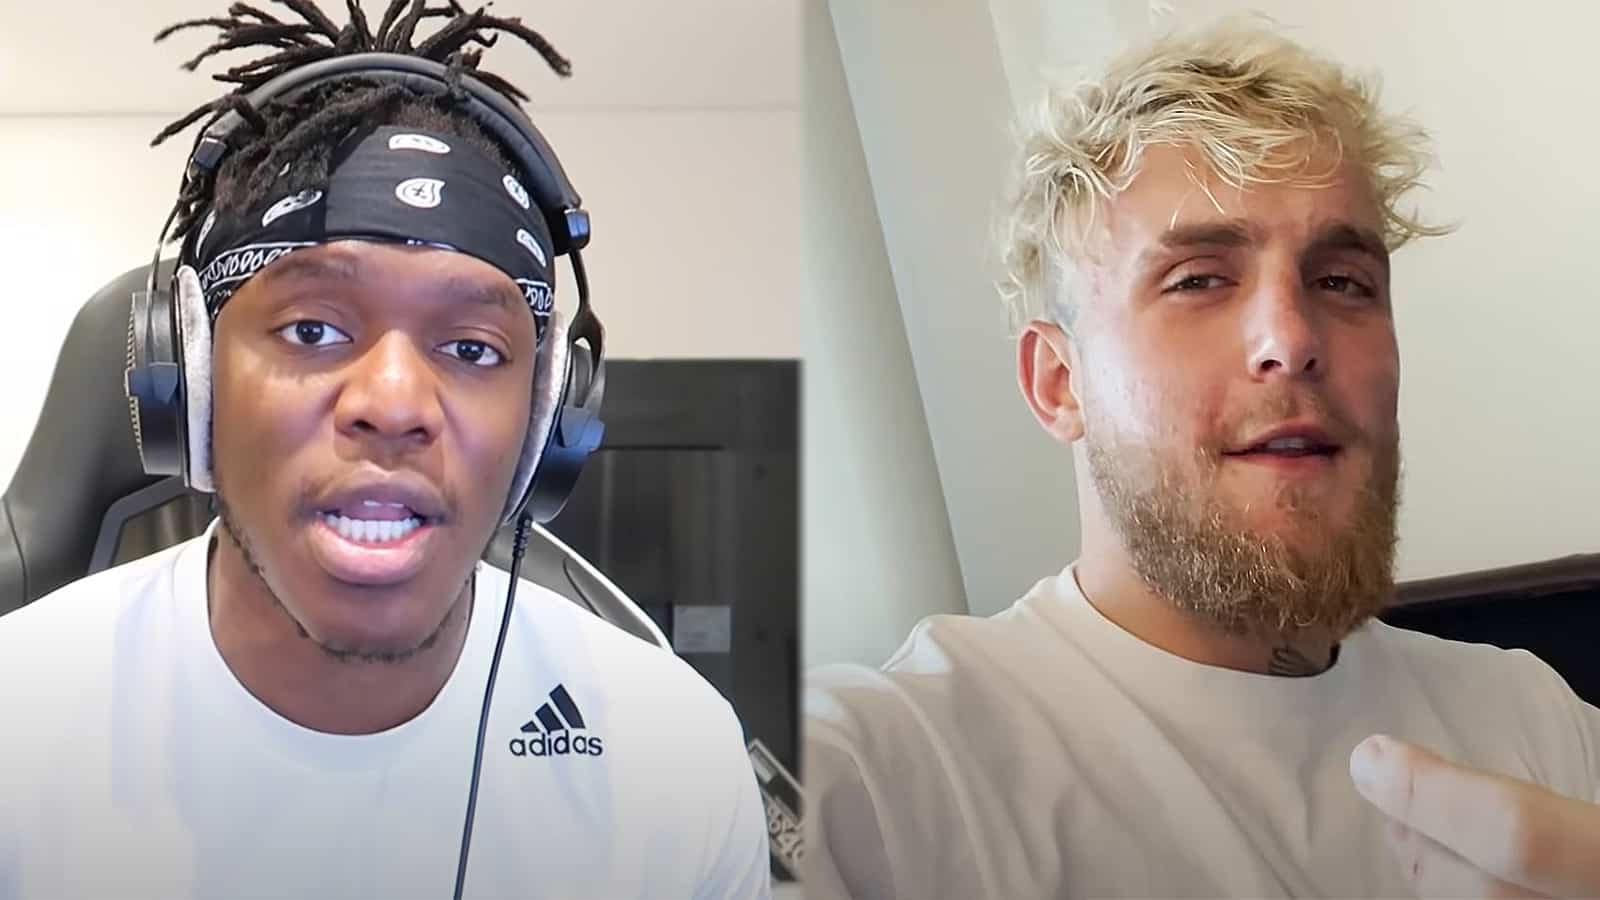 KSI hits back at Jake Pauls claims that he ducked potential boxing match